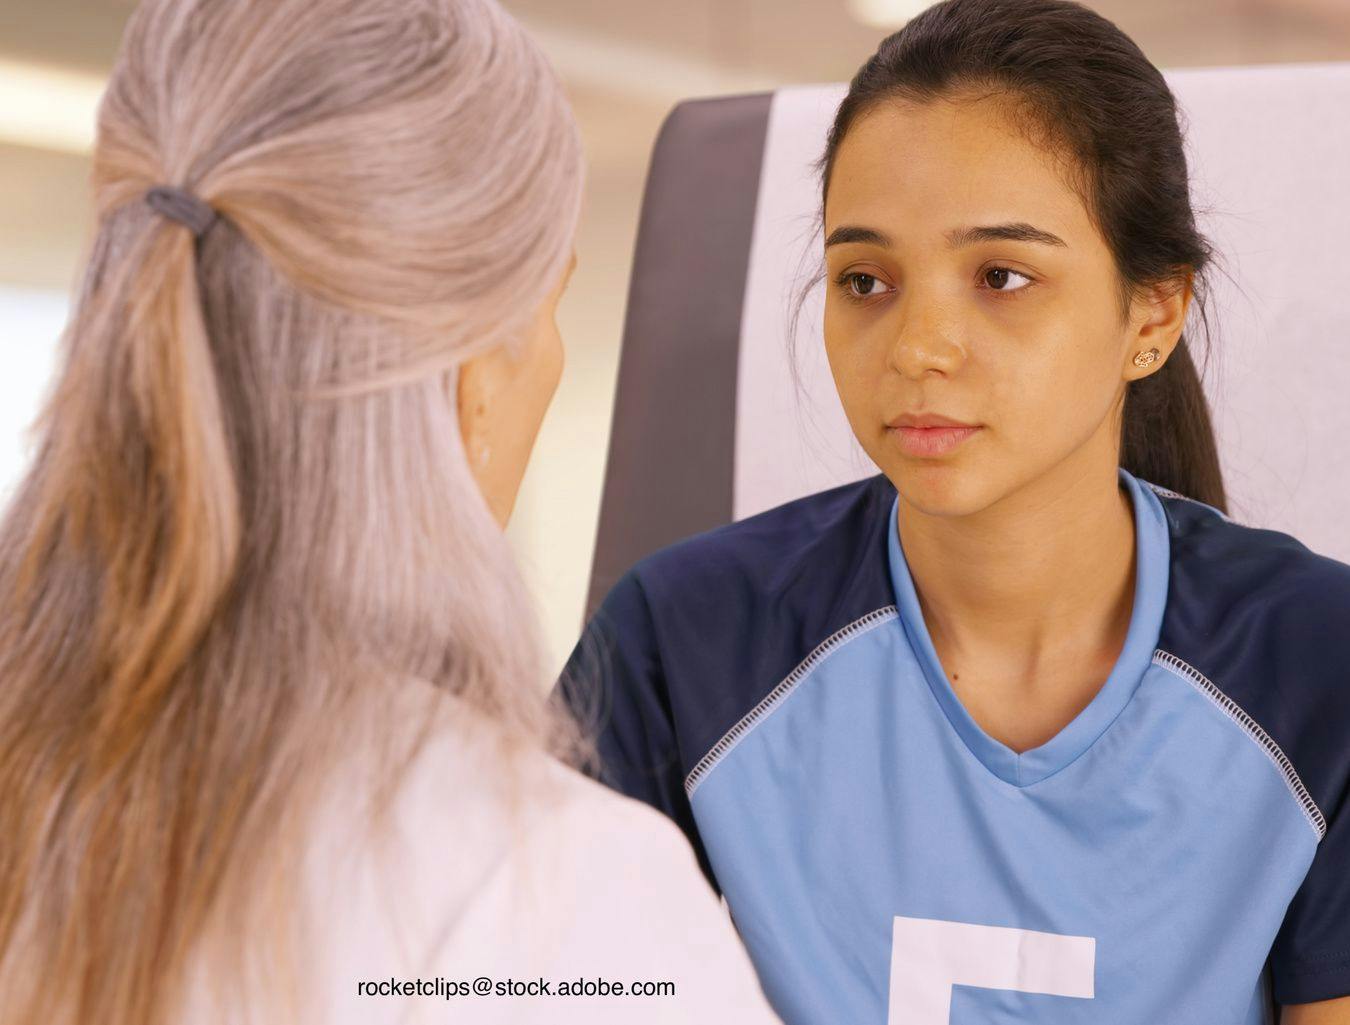 Diagnosing the female and male who present with athlete triad symptoms